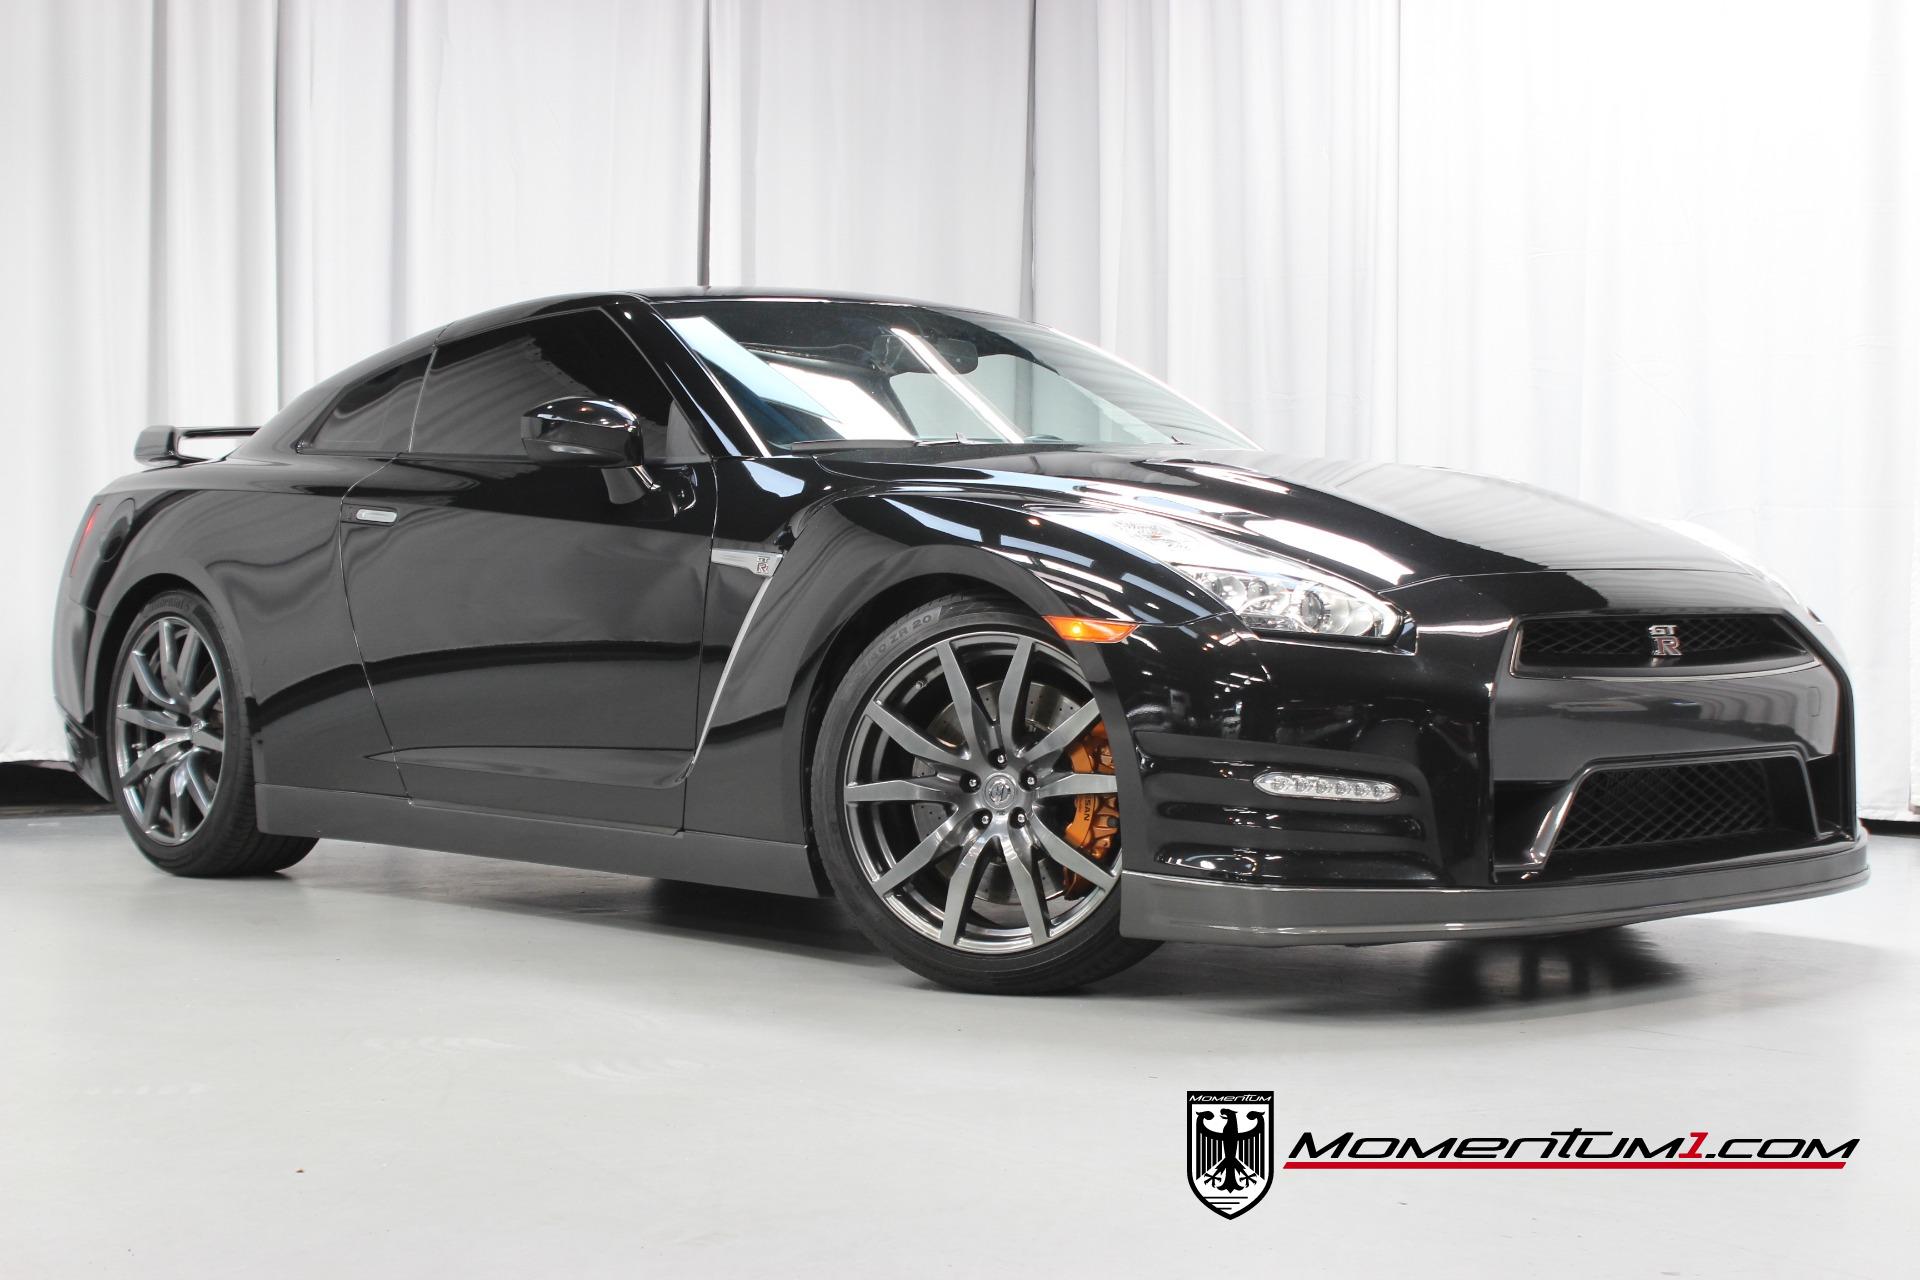 Used 2015 Nissan Gt R Premium For Sale Sold Momentum Motorcars Inc Stock 280549 9449